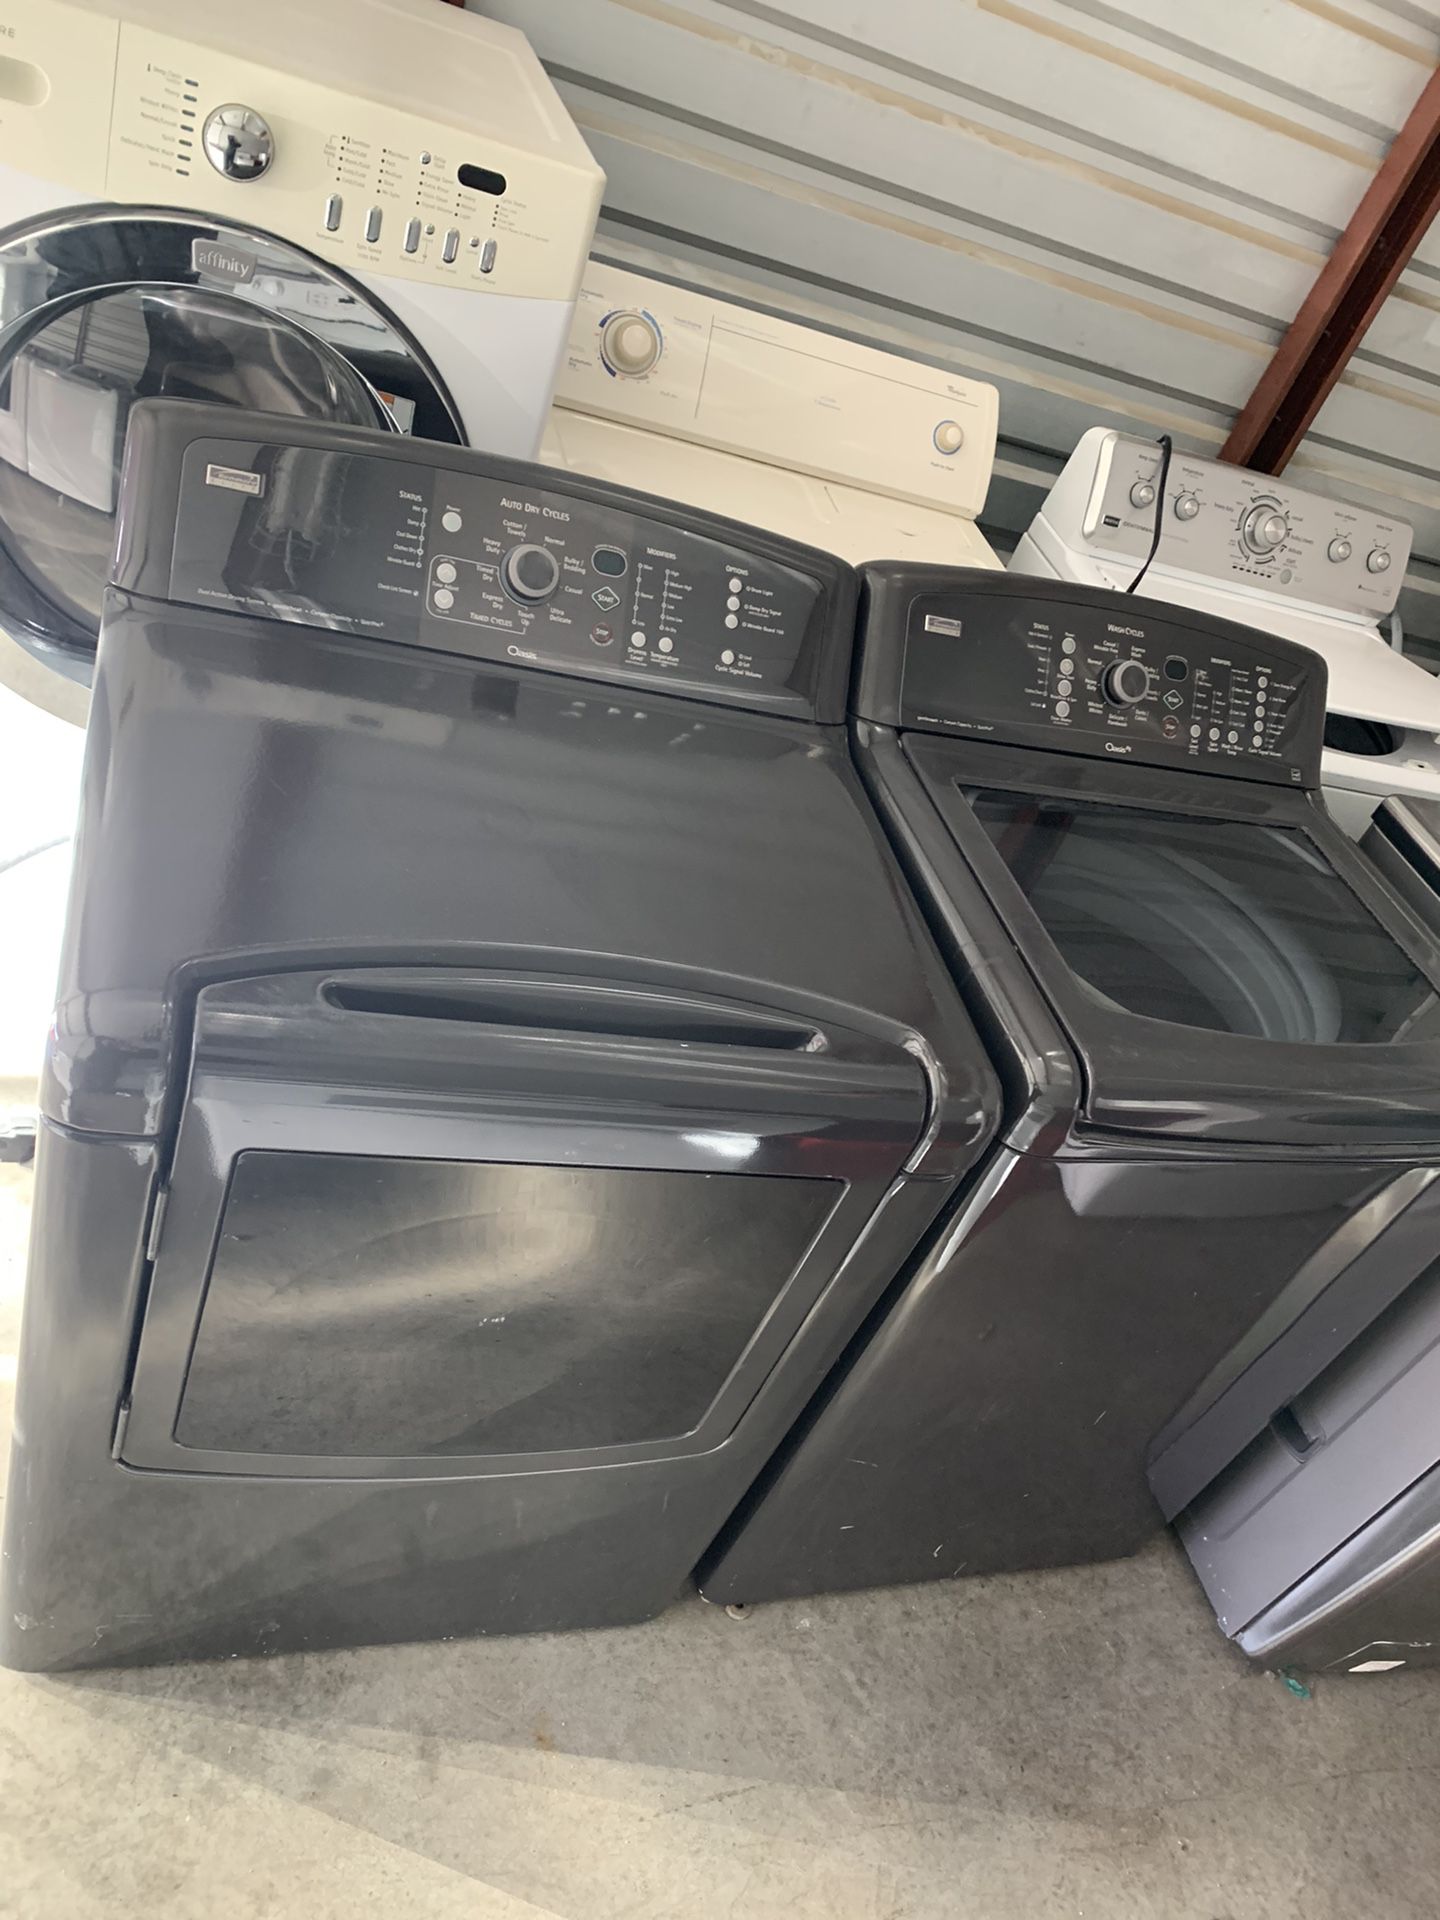 Kenmore topload Washer & Dryer